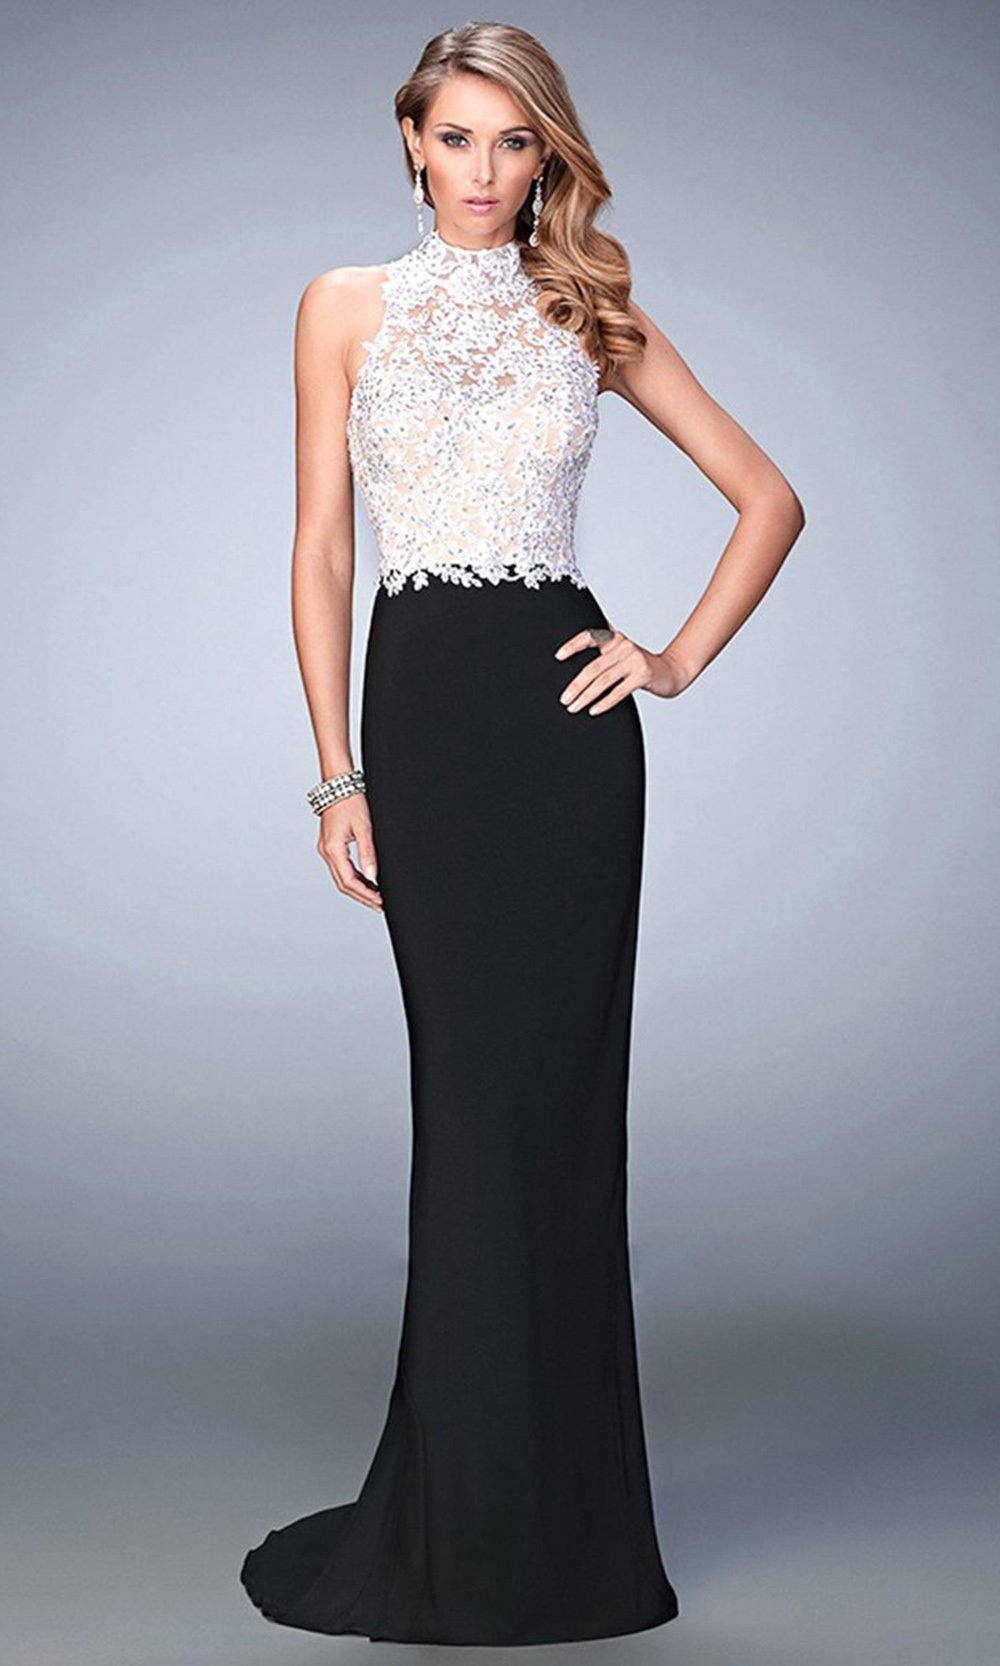 La Femme - Two-toned Lacy Evening Gown 21837SC In Black and White